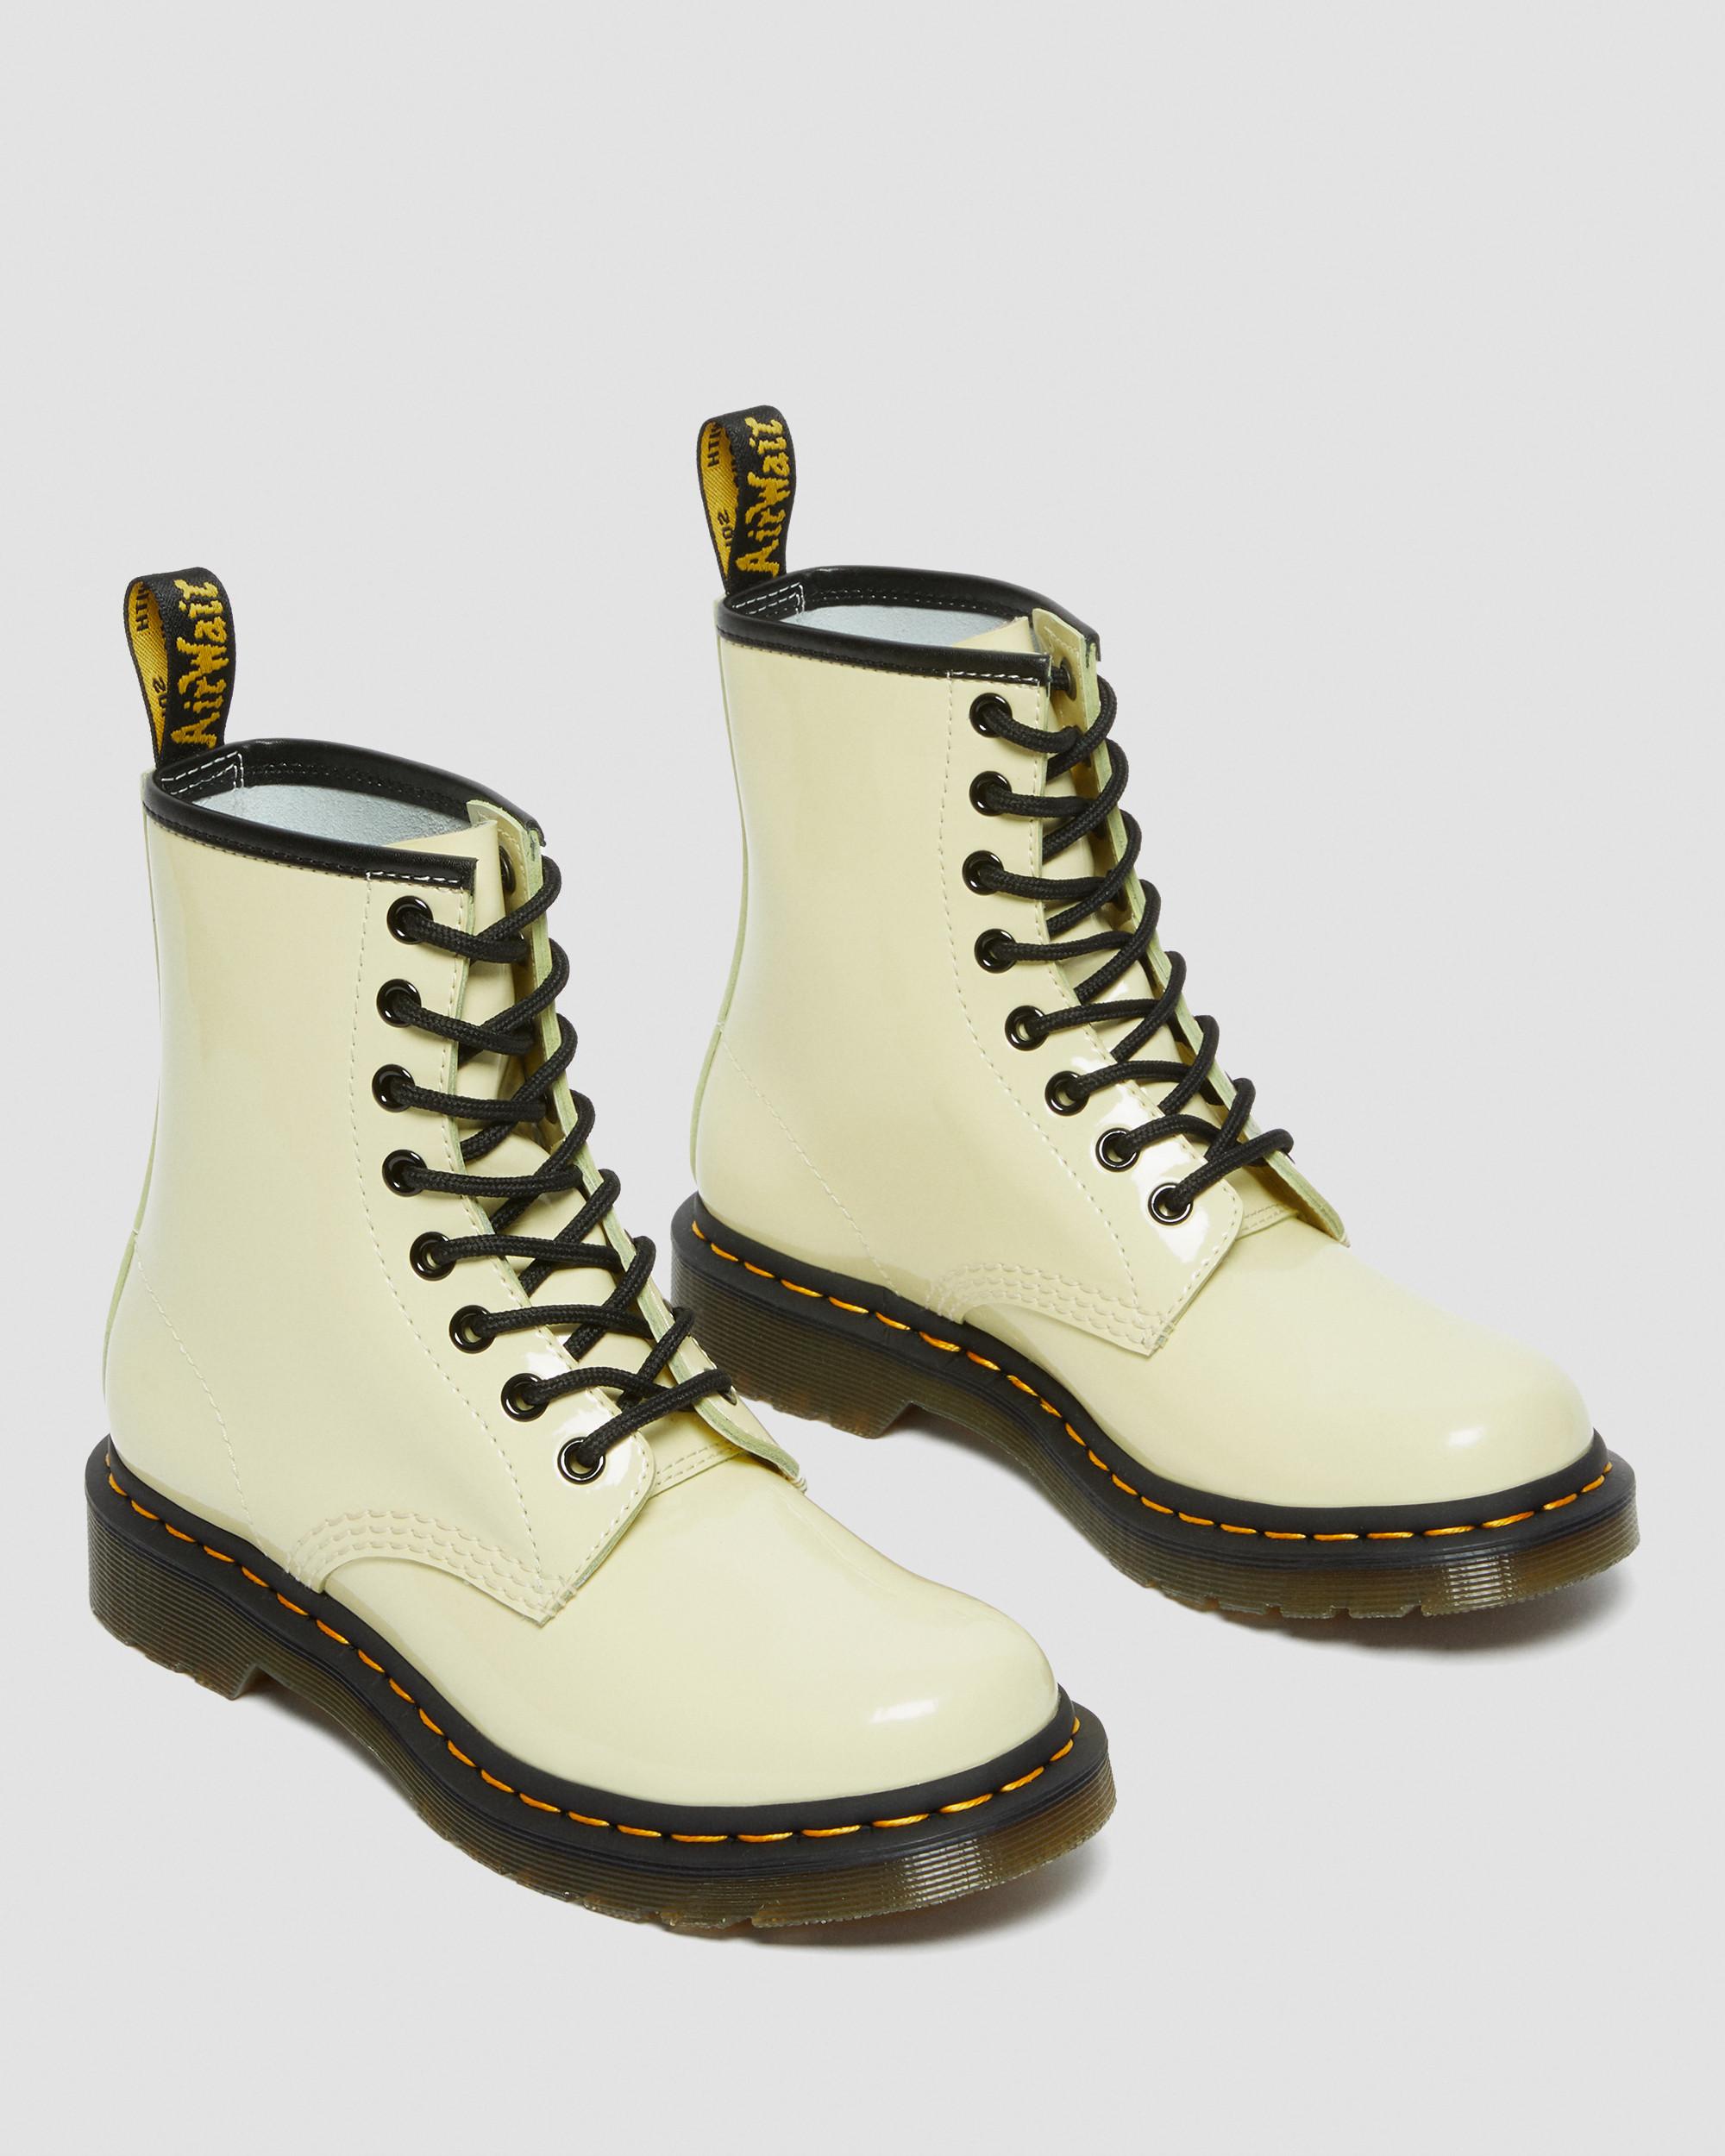 1460 Women's Patent Leather Lace Up Boots, Cream | Dr. Martens